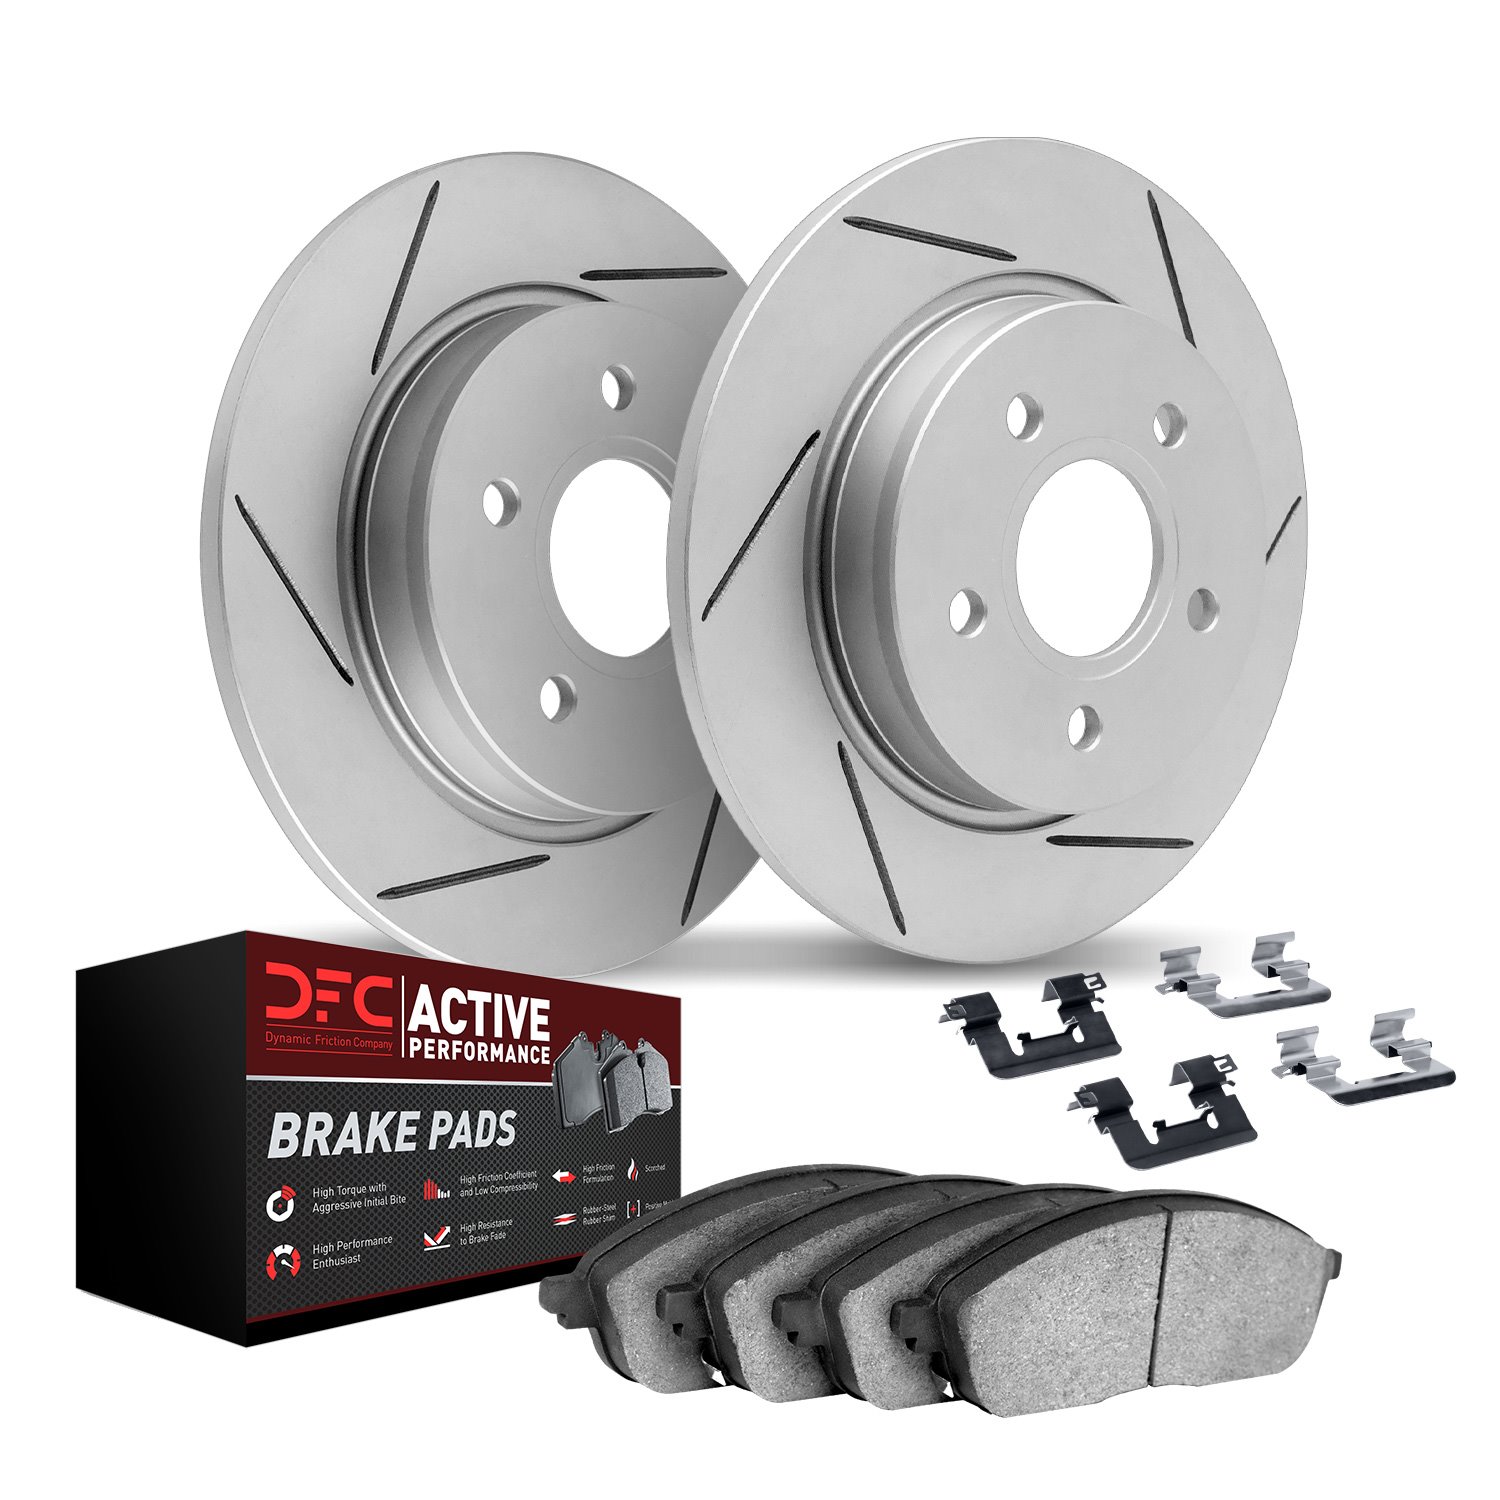 2712-59049 Geoperformance Slotted Brake Rotors with Active Performance Pads Kits & Hardware, 1998-2002 Acura/Honda, Position: Re